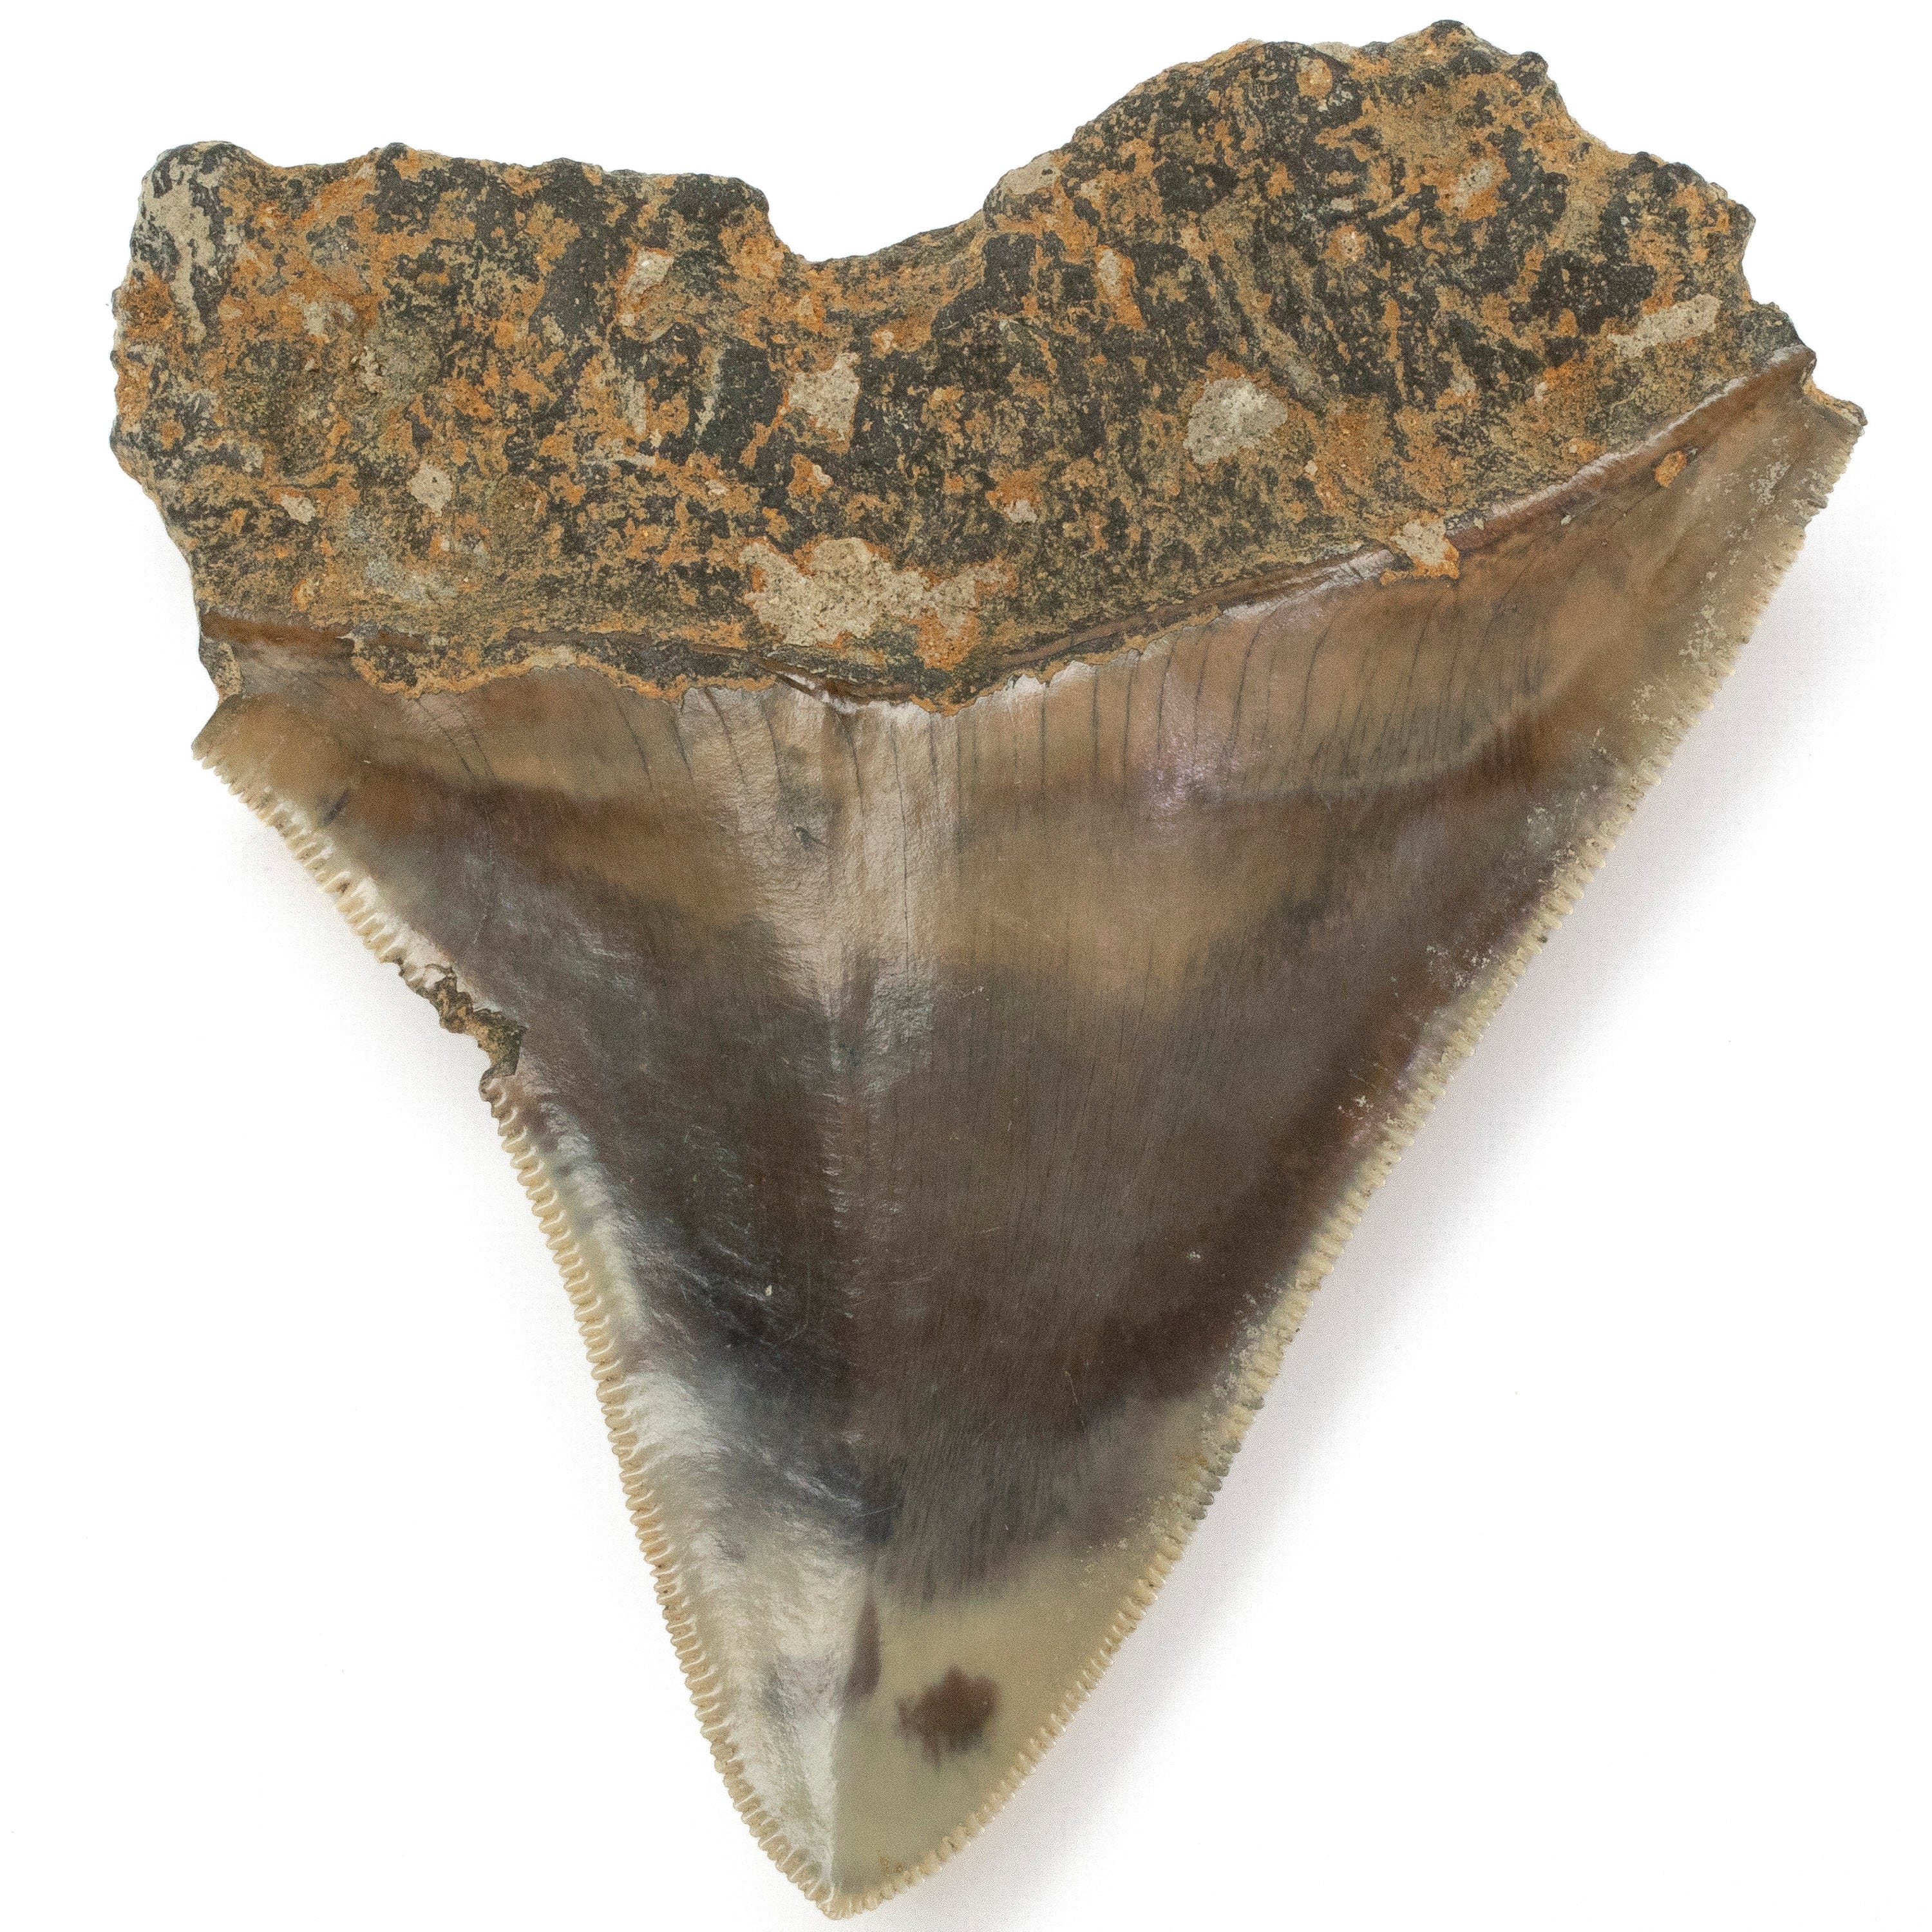 Kalifano Megalodon Teeth Natural Megalodon Tooth from Indonesia - 3.3" IST1000.001